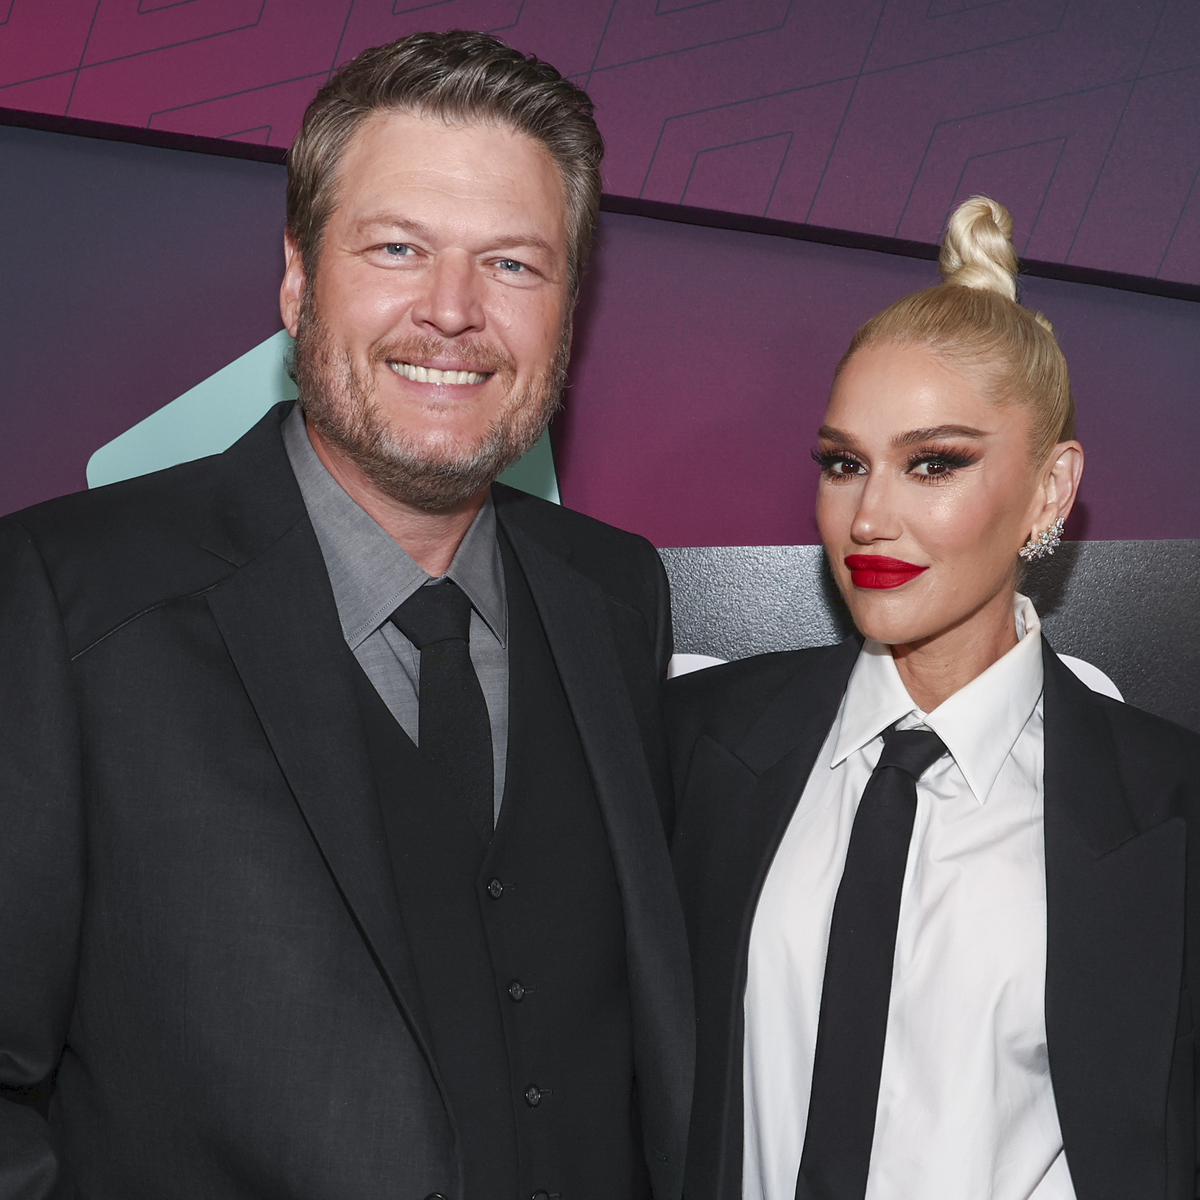 Gwen Stefani & Blake Shelton Prove Their “Love Is Alive” in New Collab